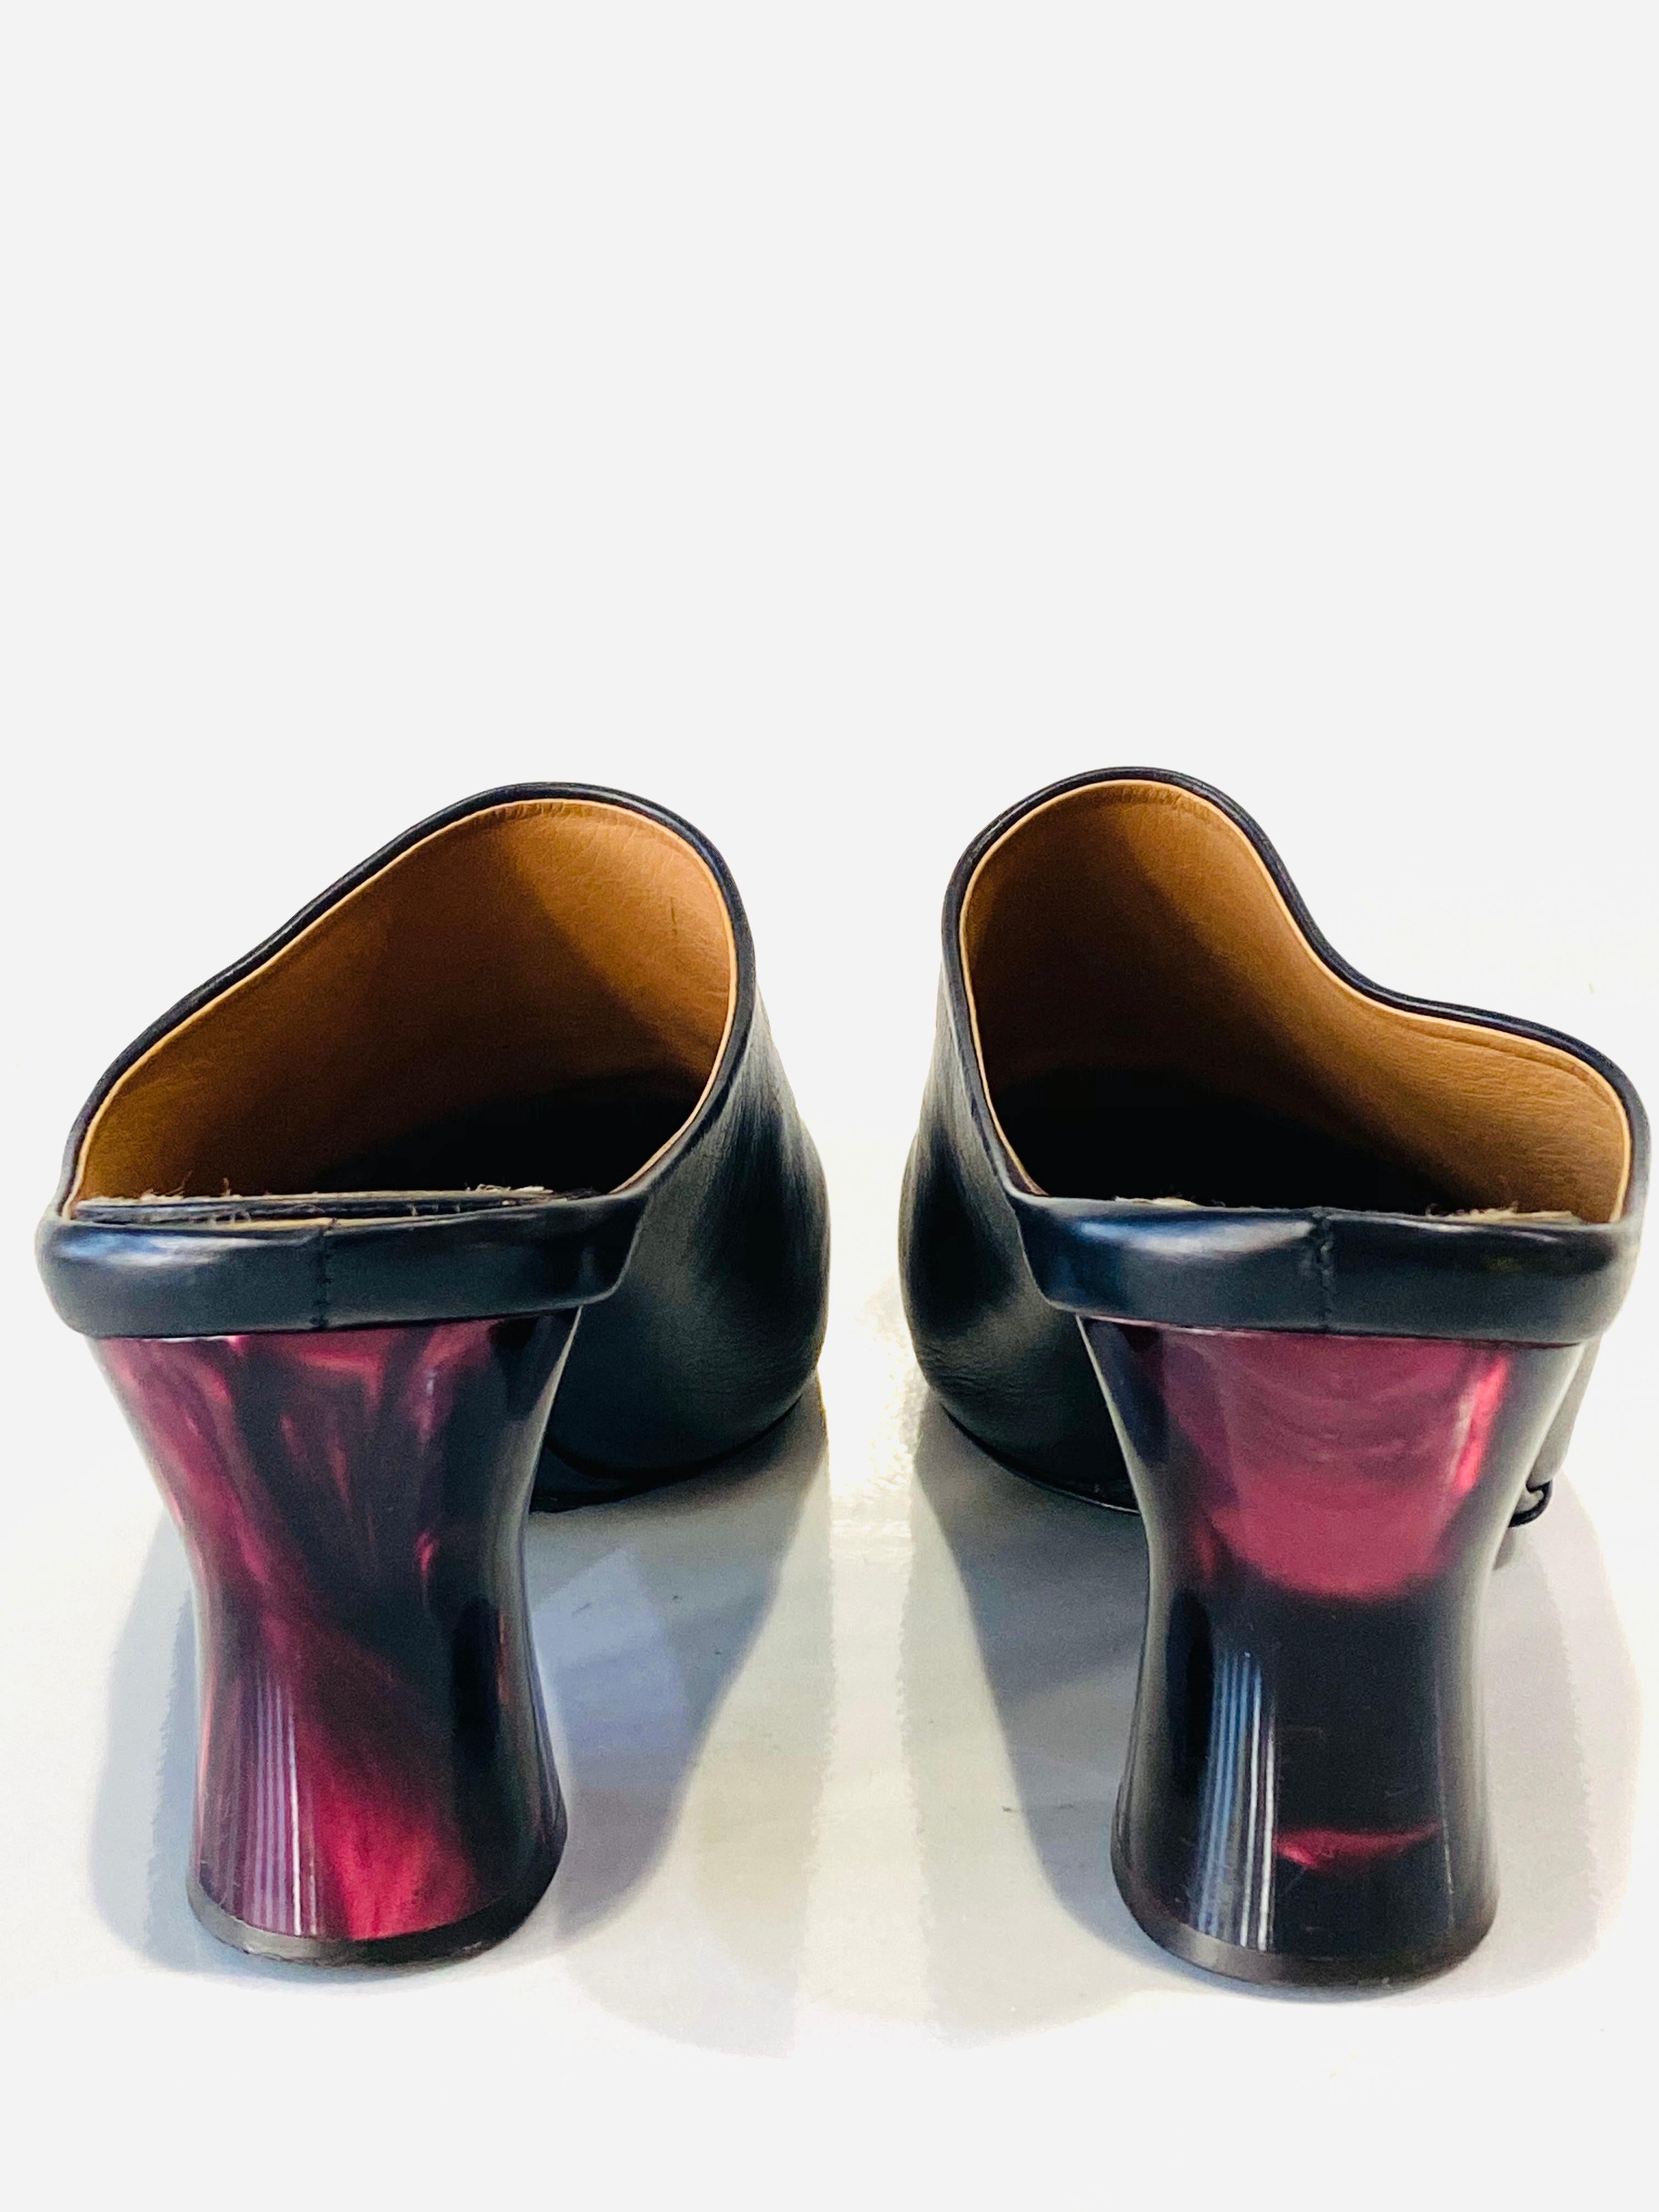 THE ROW Angela Resin Heel Mules Black/ Bordeaux Shoes Size 39.5 2